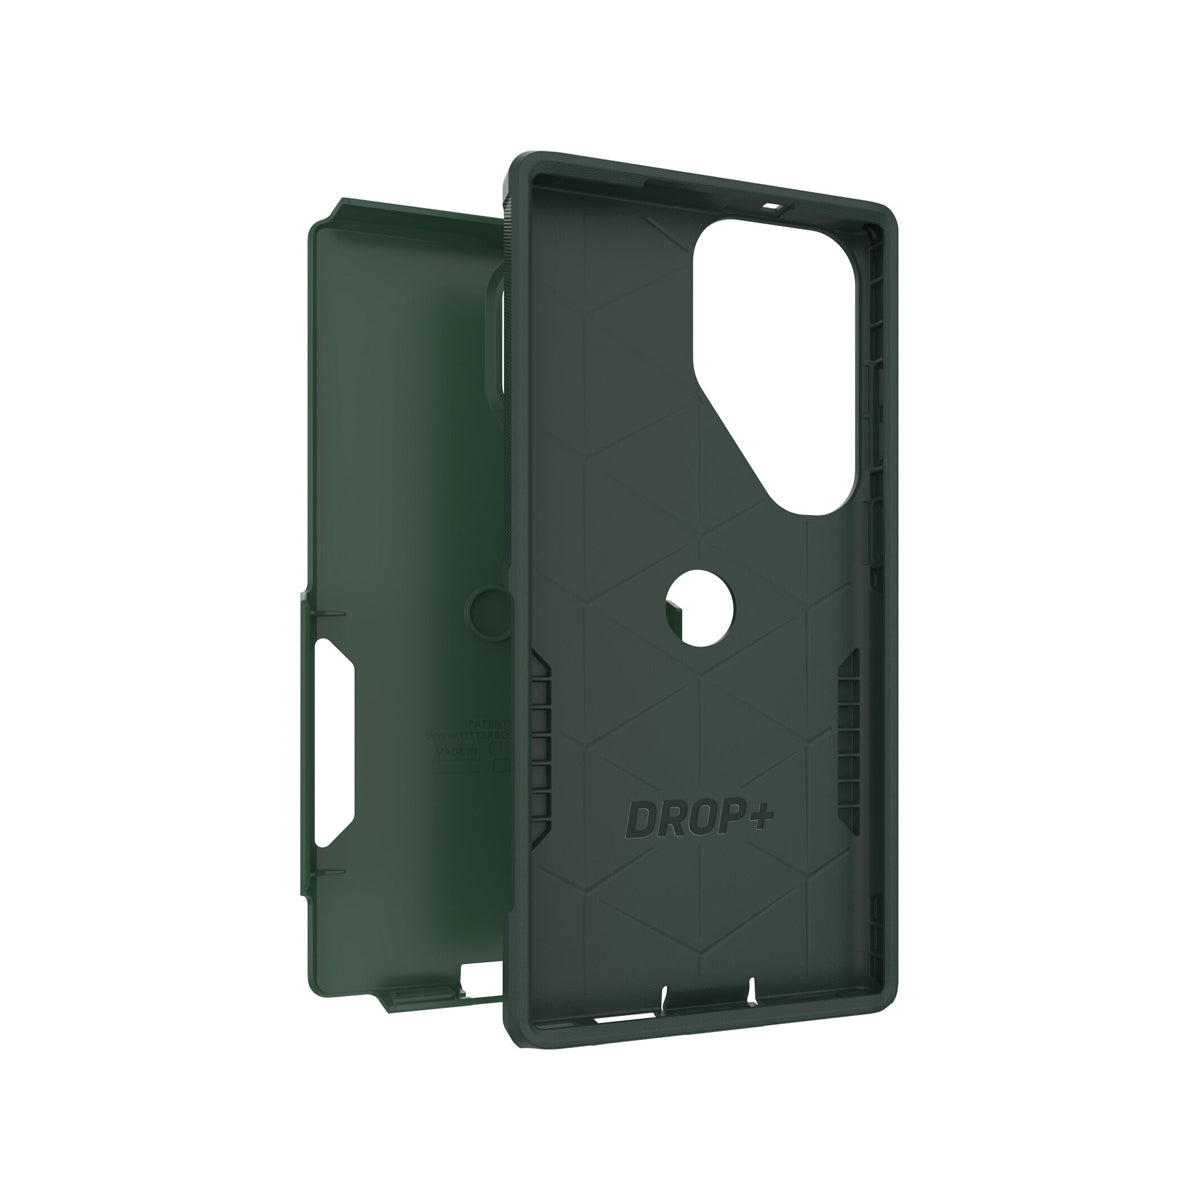 Otterbox Commuter Series Antimicrobial Phone Case for Samsung Galaxy S23 Ultra.